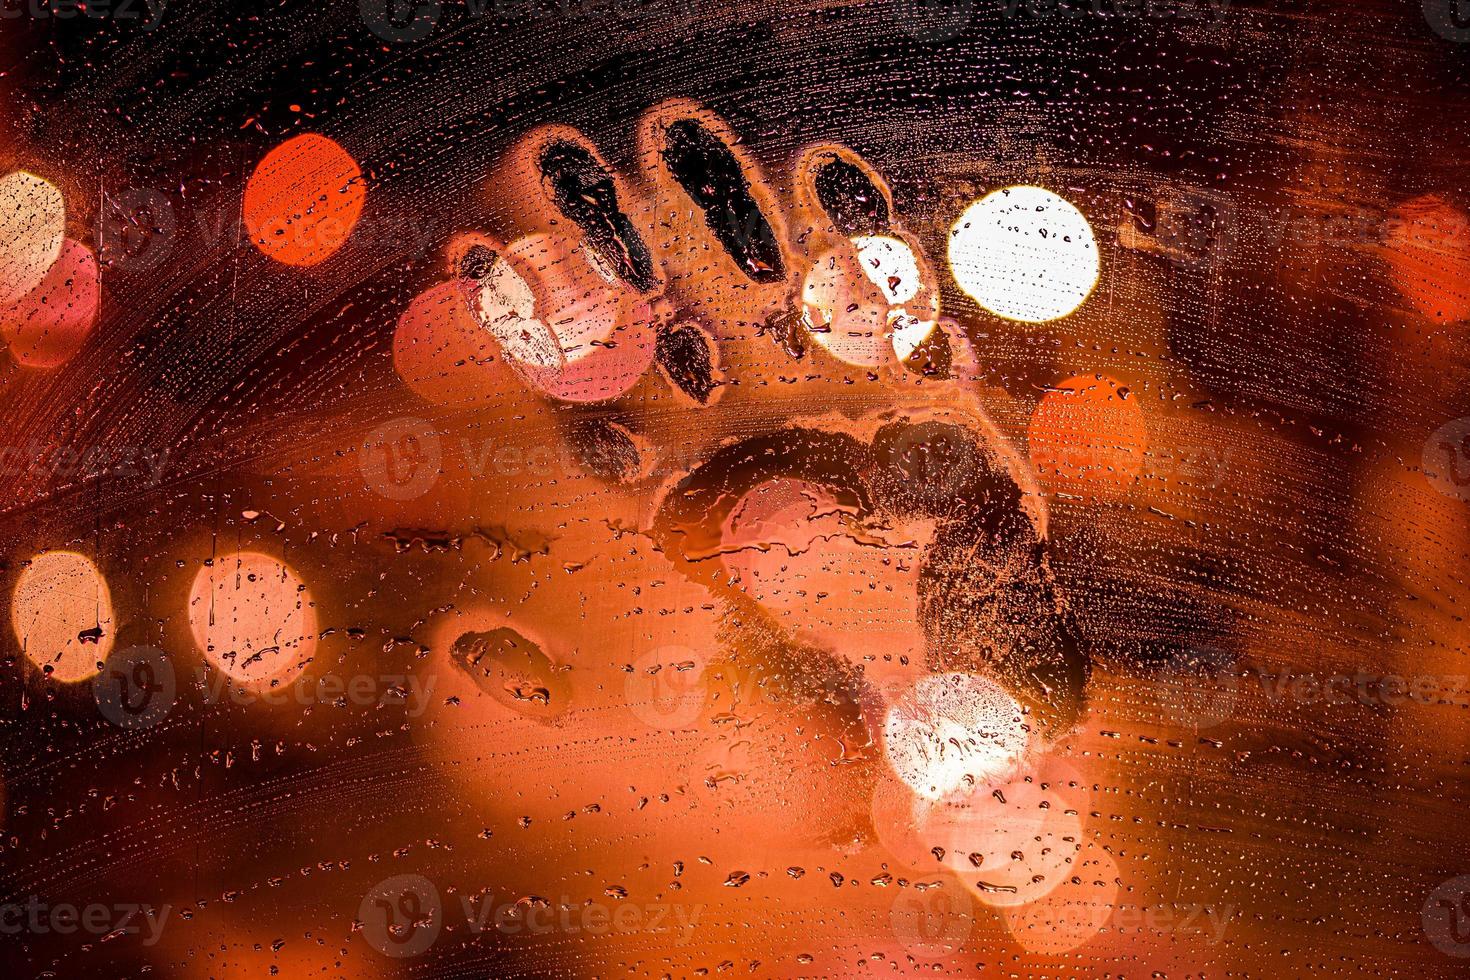 handprint on night wet glass in red colors with blurry street light in backround photo